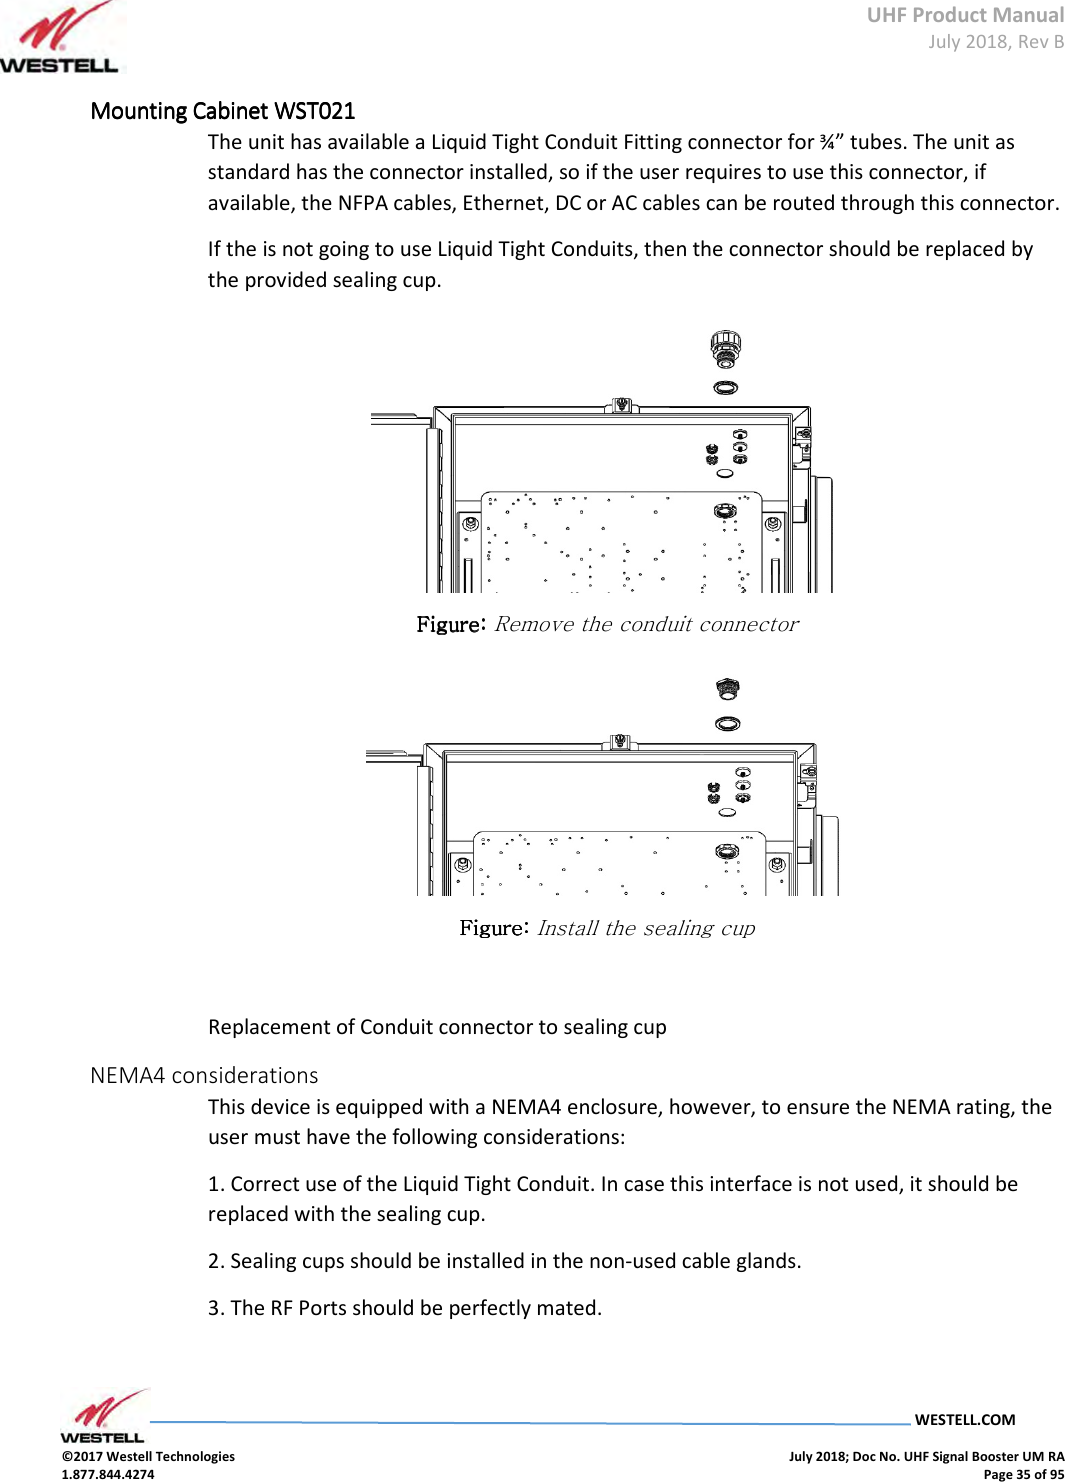 UHF Product Manual July 2018, Rev B   WESTELL.COM  ©2017 Westell Technologies    July 2018; Doc No. UHF Signal Booster UM RA 1.877.844.4274    Page 35 of 95  Mounting Cabinet Mounting Cabinet Mounting Cabinet Mounting Cabinet WST021WST021WST021WST021    The unit has available a Liquid Tight Conduit Fitting connector for ¾” tubes. The unit as standard has the connector installed, so if the user requires to use this connector, if available, the NFPA cables, Ethernet, DC or AC cables can be routed through this connector. If the is not going to use Liquid Tight Conduits, then the connector should be replaced by the provided sealing cup.  Figure: Figure: Figure: Figure: Remove the conduit connector  Figure: Figure: Figure: Figure: Install the sealing cup  Replacement of Conduit connector to sealing cup NEMA4 considerations This device is equipped with a NEMA4 enclosure, however, to ensure the NEMA rating, the user must have the following considerations: 1. Correct use of the Liquid Tight Conduit. In case this interface is not used, it should be replaced with the sealing cup. 2. Sealing cups should be installed in the non-used cable glands. 3. The RF Ports should be perfectly mated.  